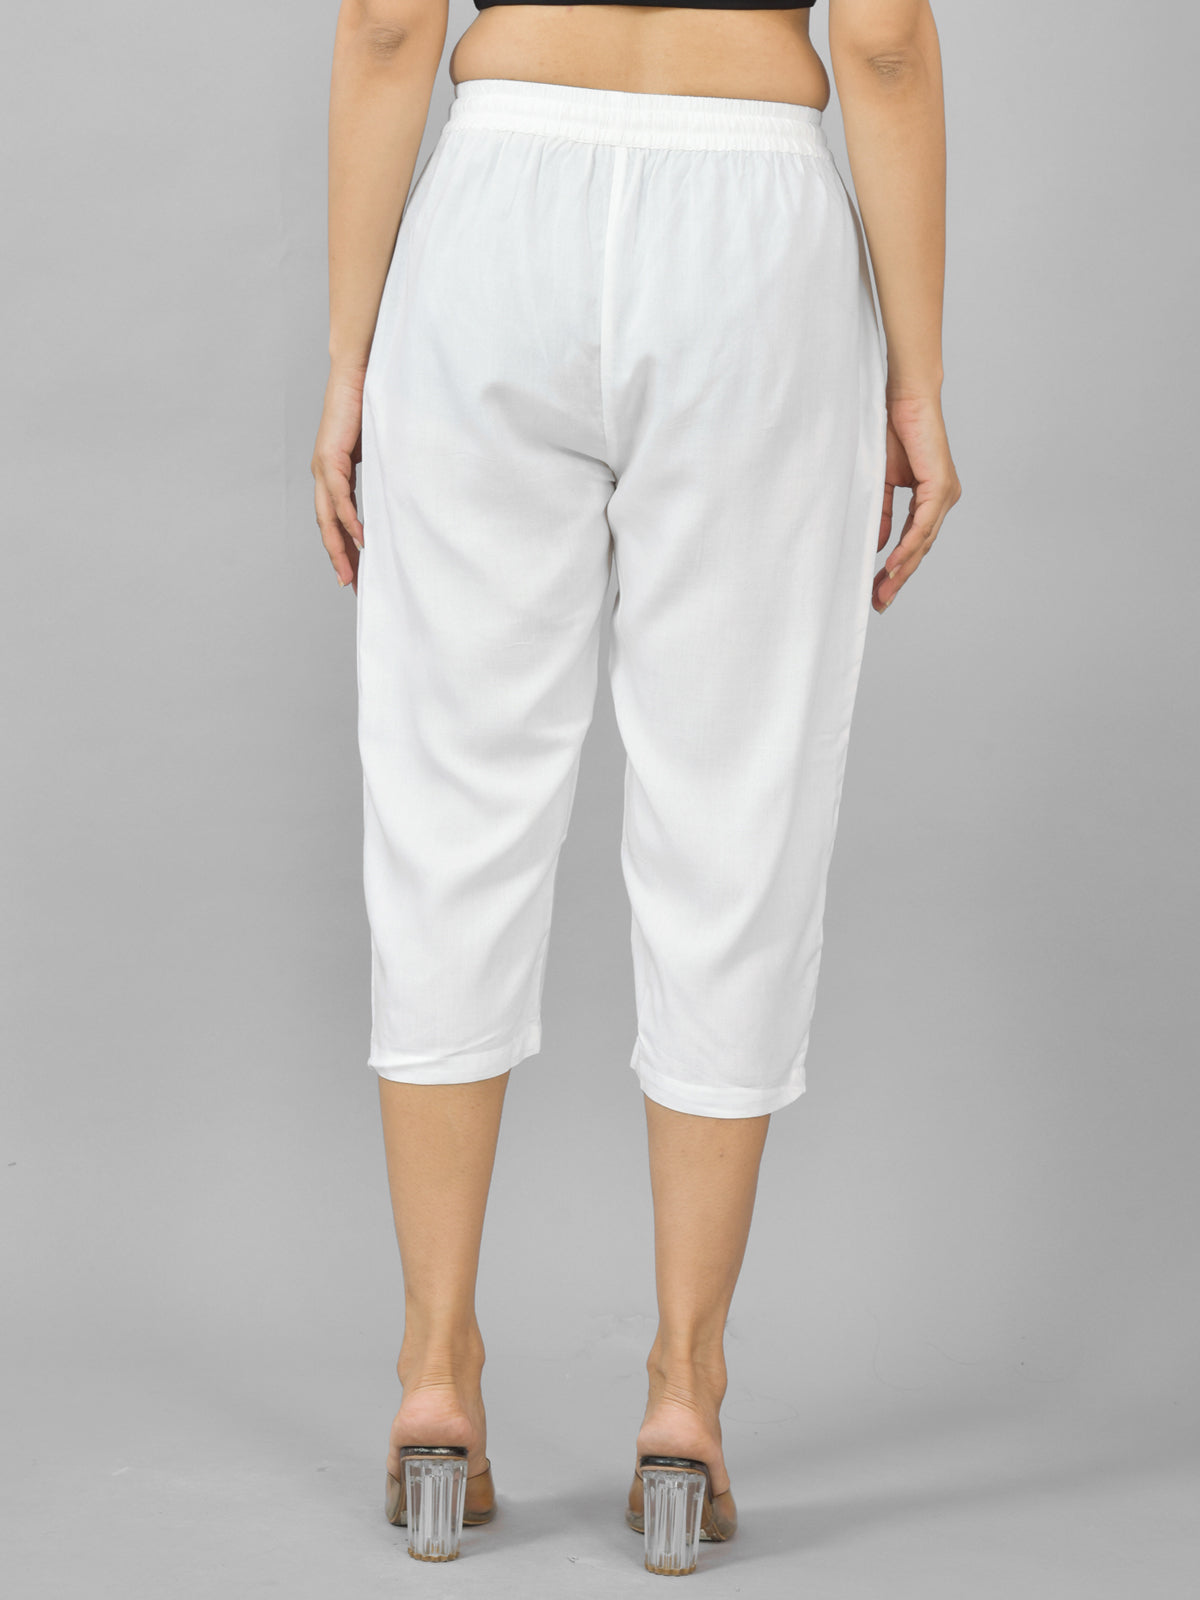 Pack Of 2 Womens Black And White Calf Length Rayon Culottes Trouser Combo